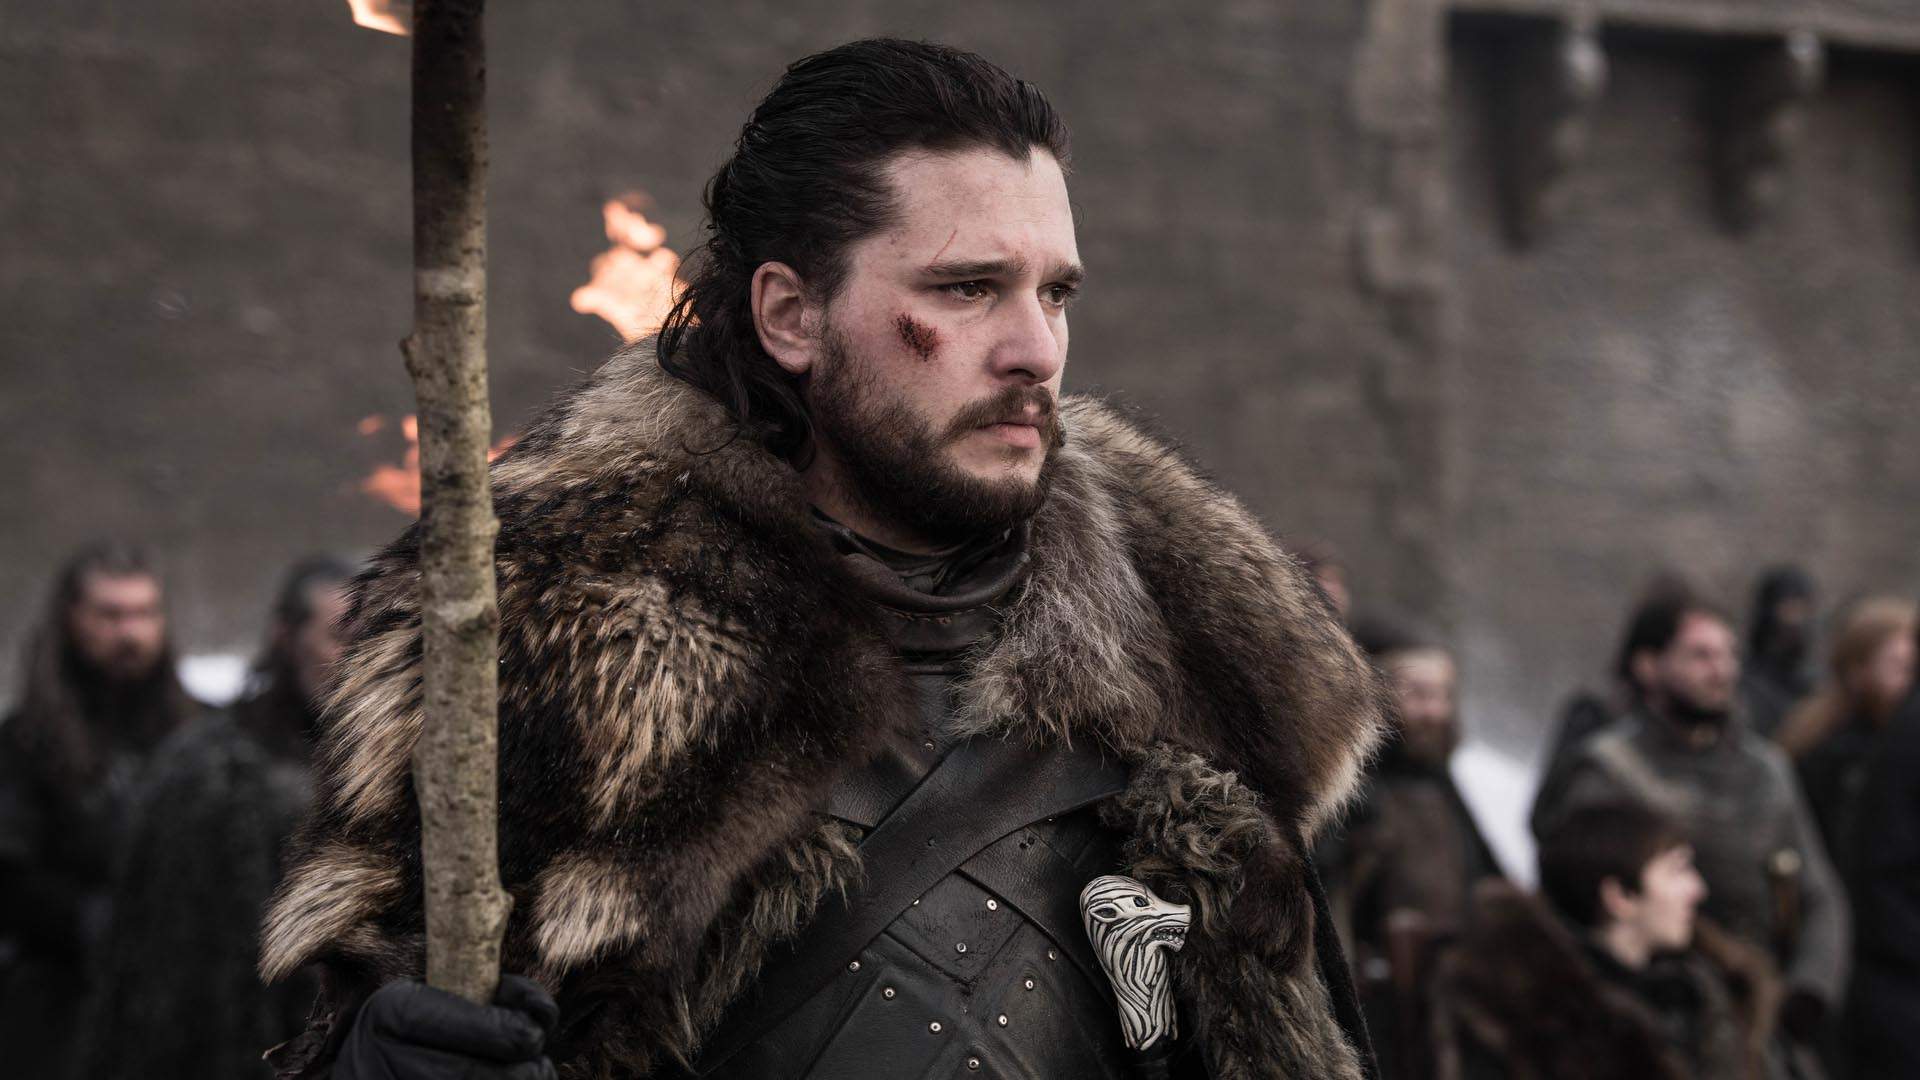 It Looks Like HBO Might Be Making a New 'Game of Thrones' Sequel Series About Jon Snow